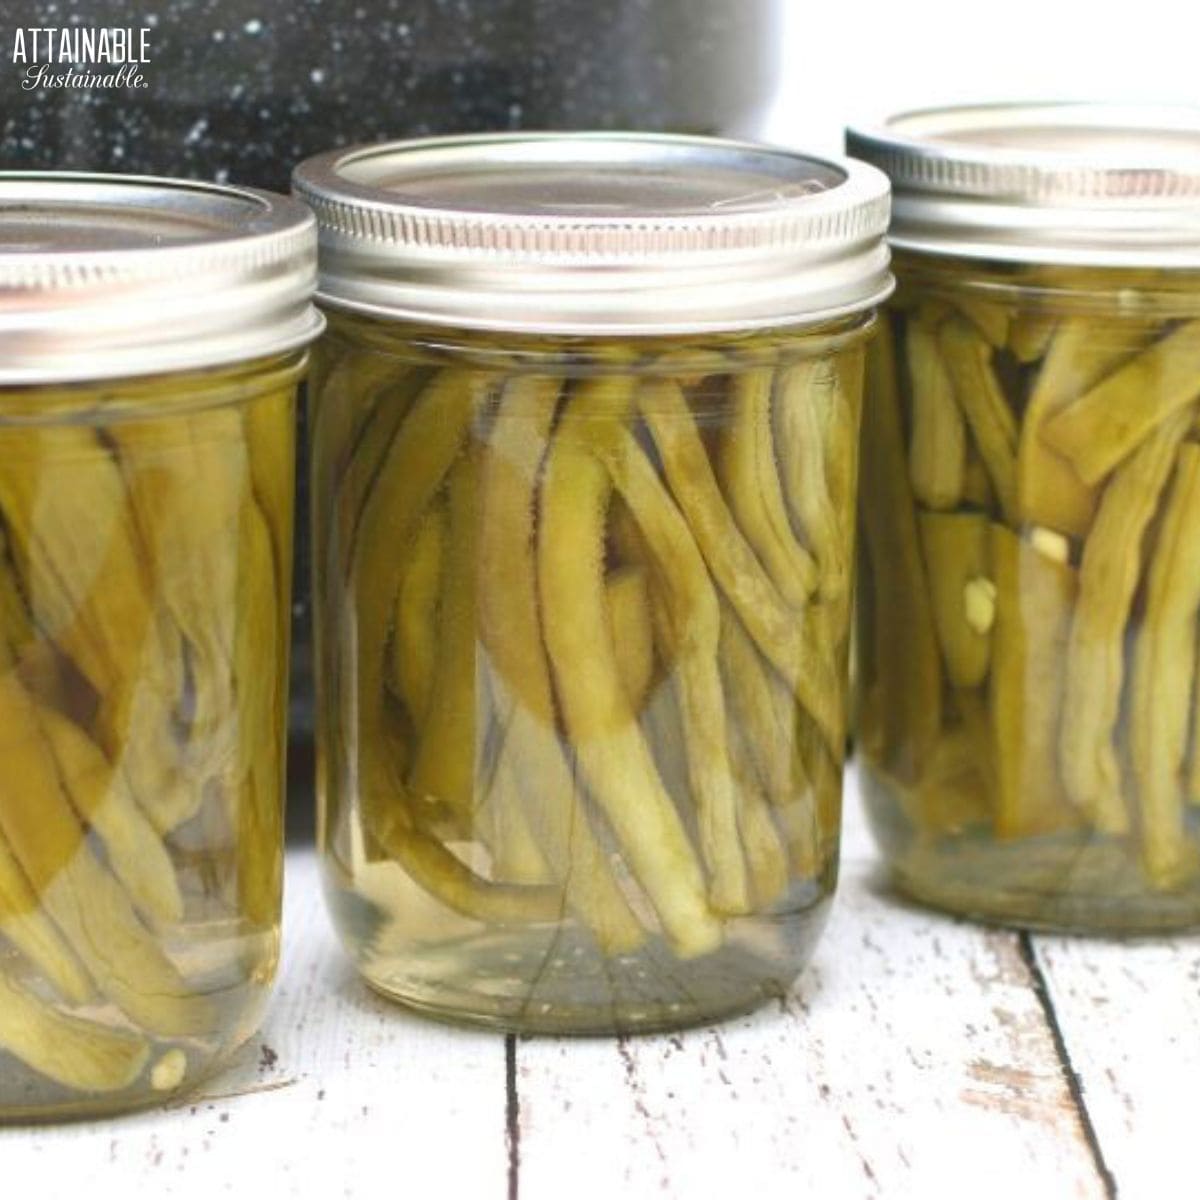 jars of pickled green beans after canning.